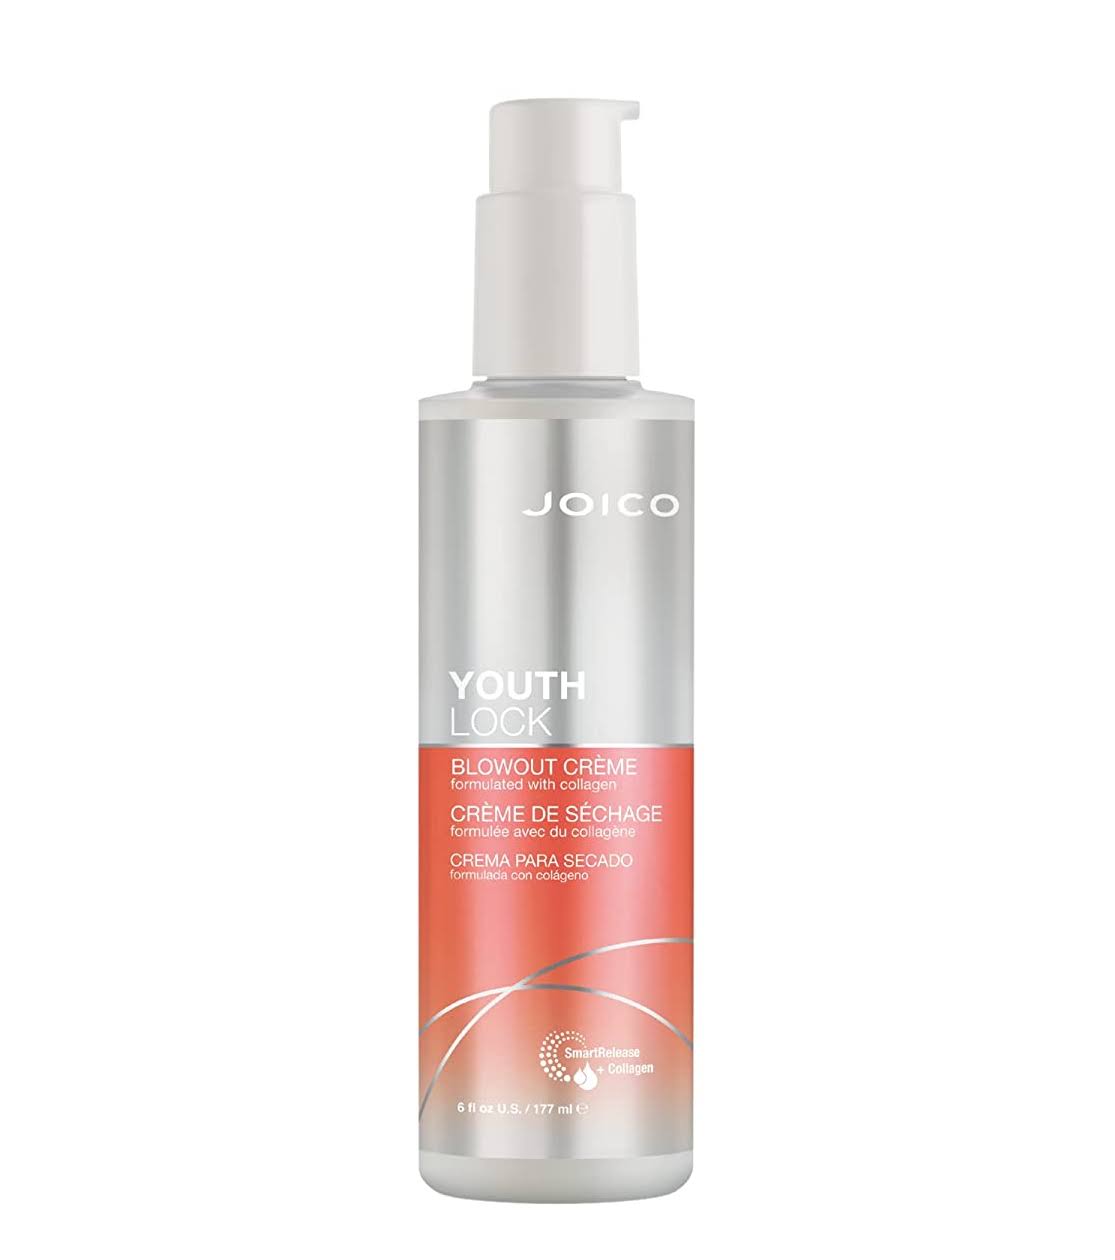 Joico - YouthLock Blowout Crme - 2596912 - 074469524940